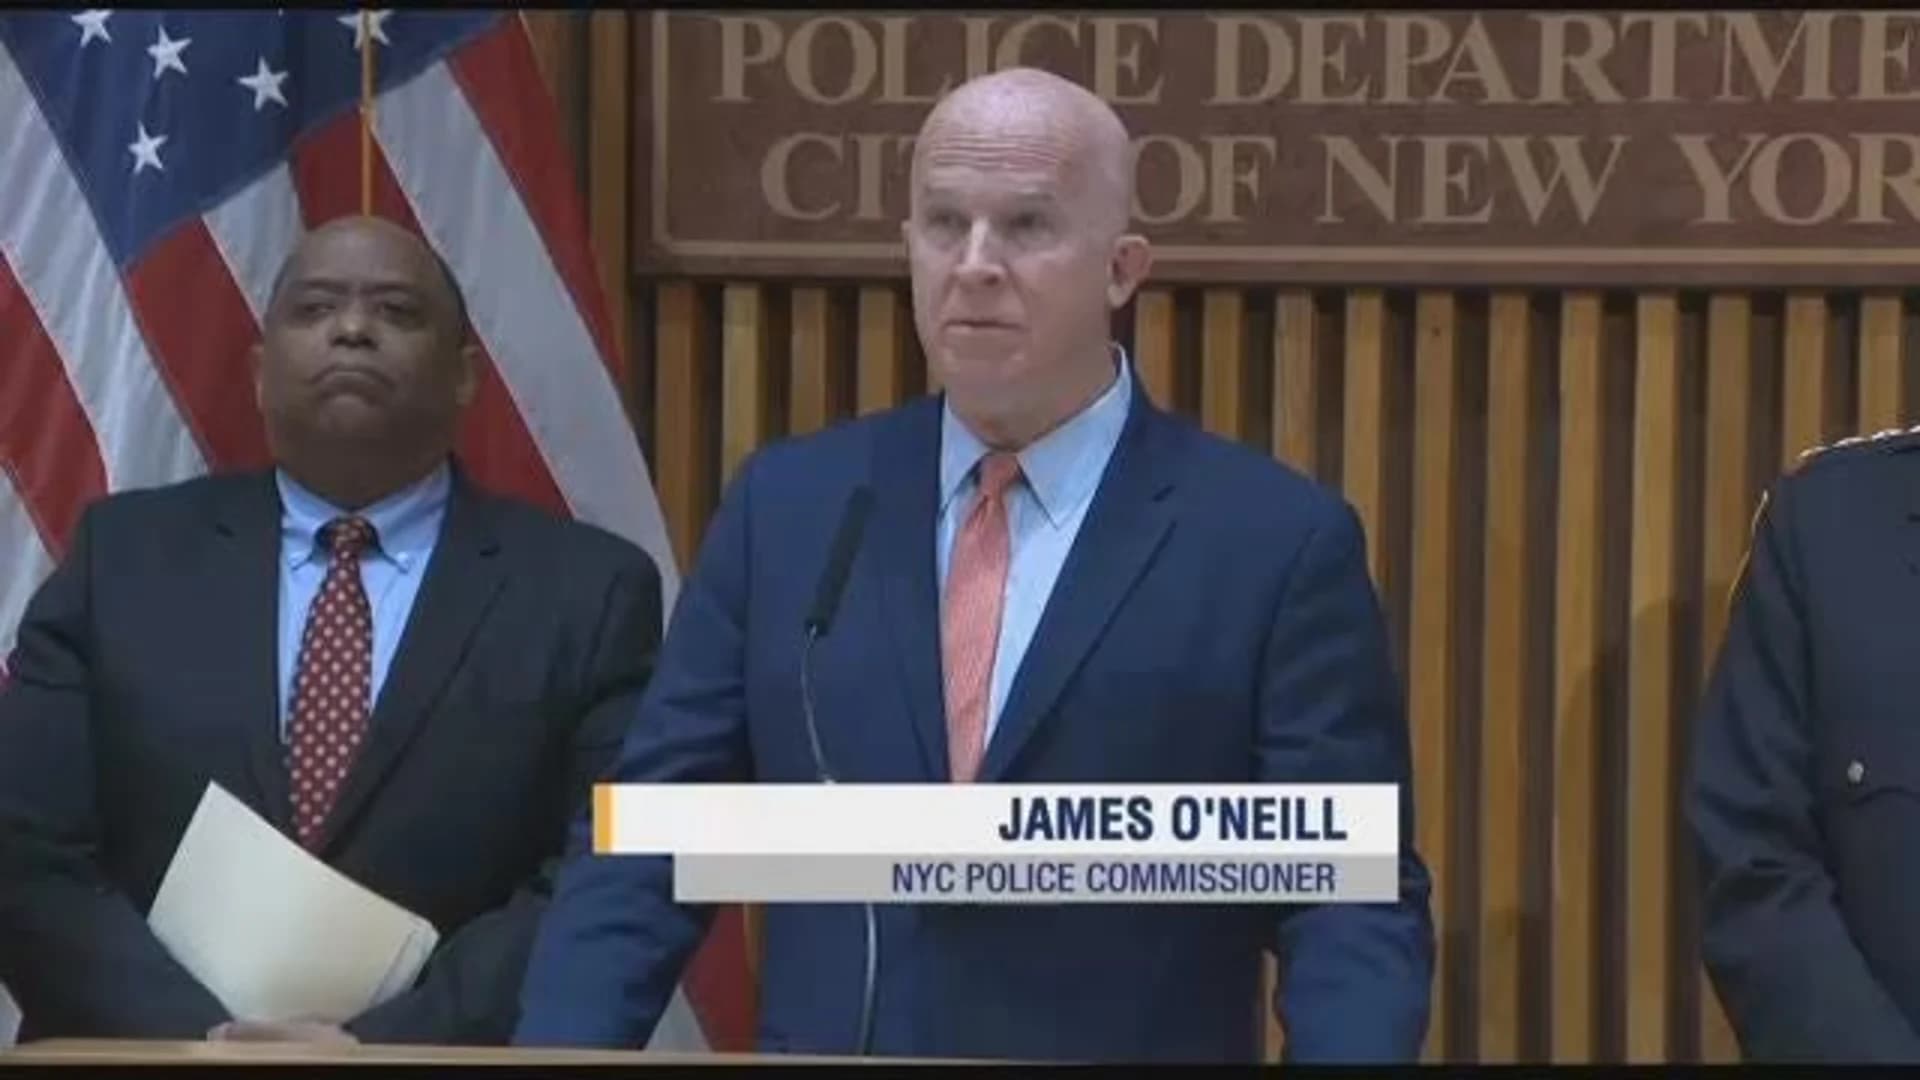 NYPD says it's rolling out recommended changes to disciplinary system